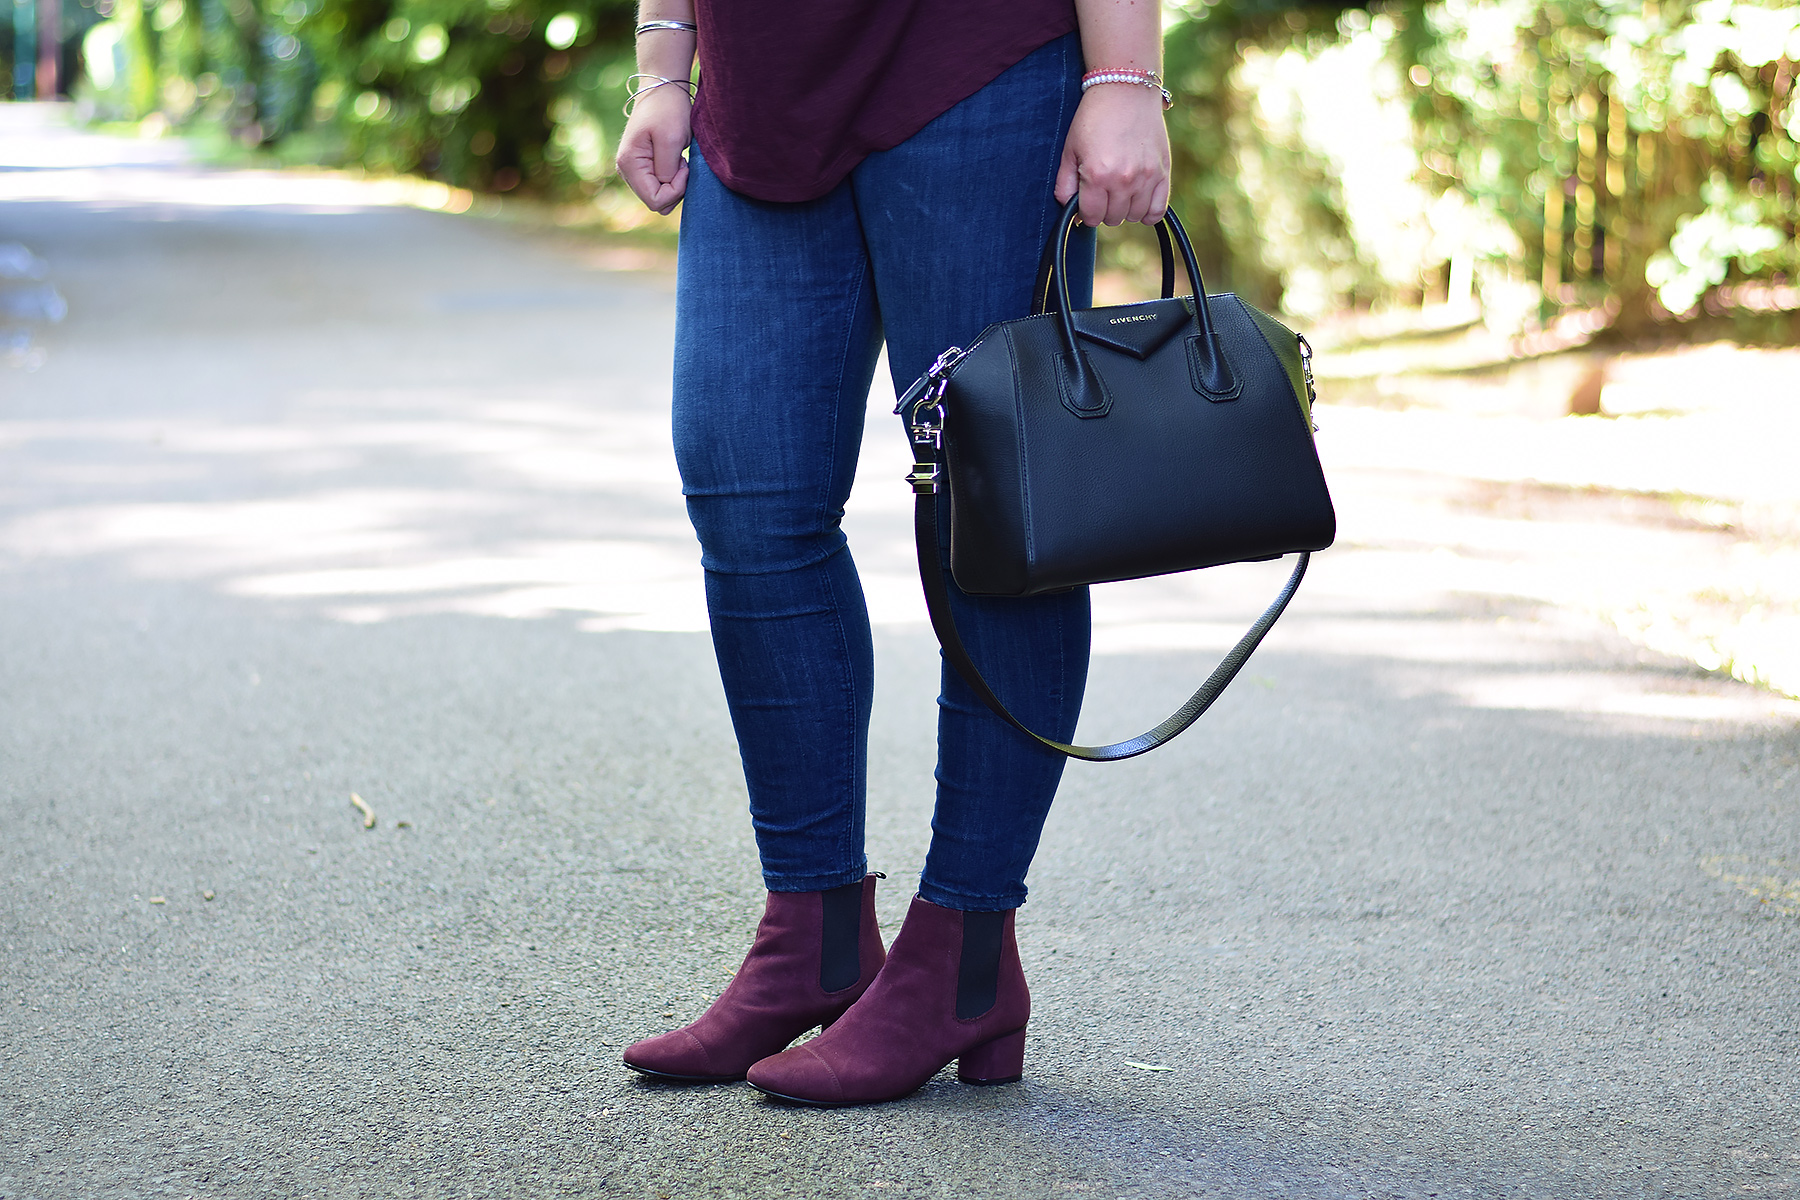 Boden Oxblood Suede Chelsea Ankle Boots with Givenchy Antigona